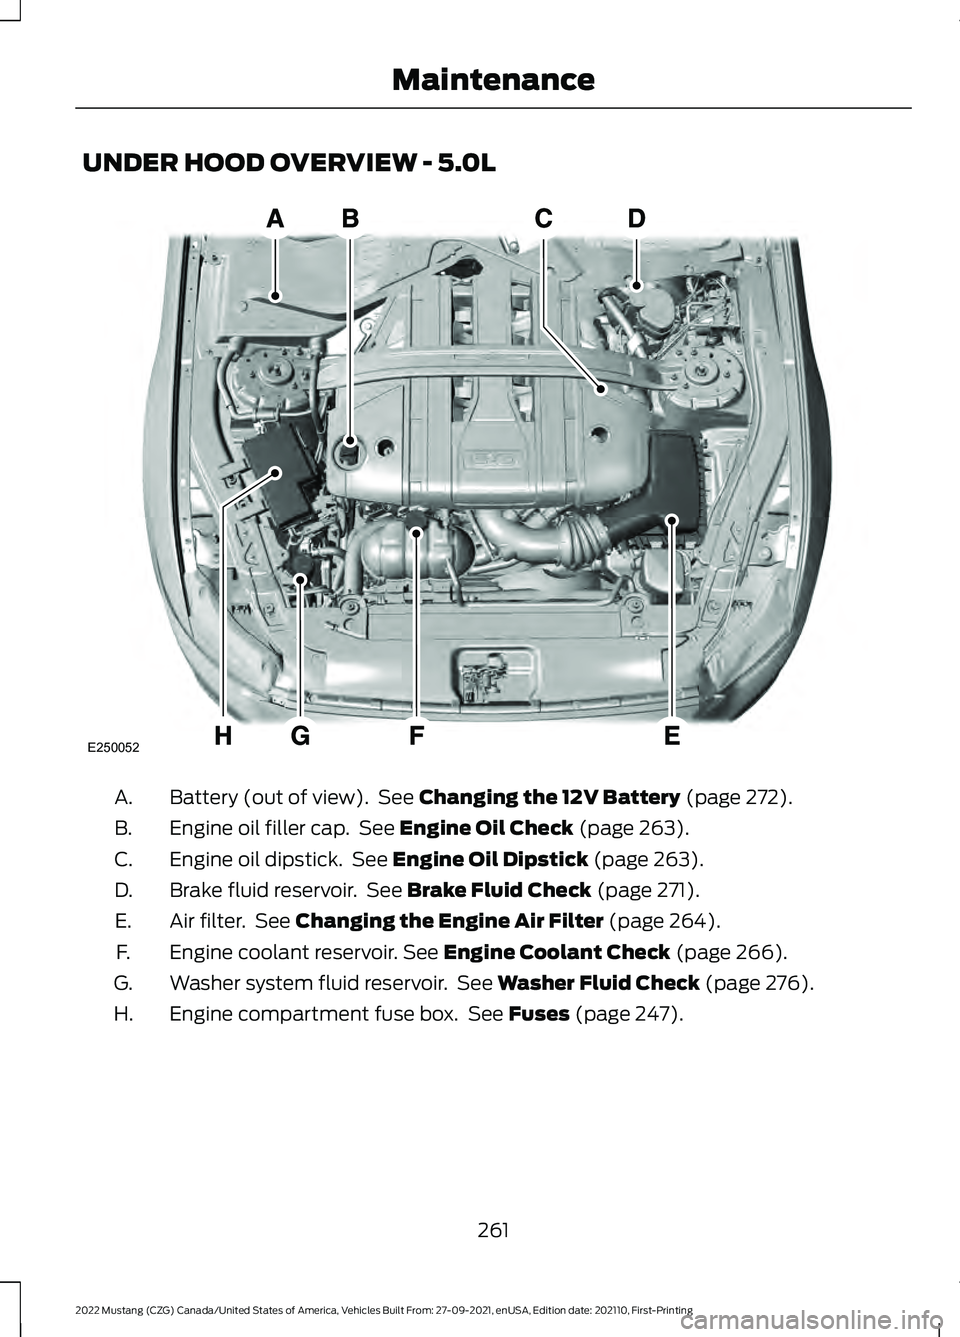 FORD MUSTANG 2022  Owners Manual UNDER HOOD OVERVIEW - 5.0L
Battery (out of view).  See Changing the 12V Battery (page 272).
A.
Engine oil filler cap.  See 
Engine Oil Check (page 263).
B.
Engine oil dipstick.  See 
Engine Oil Dipsti